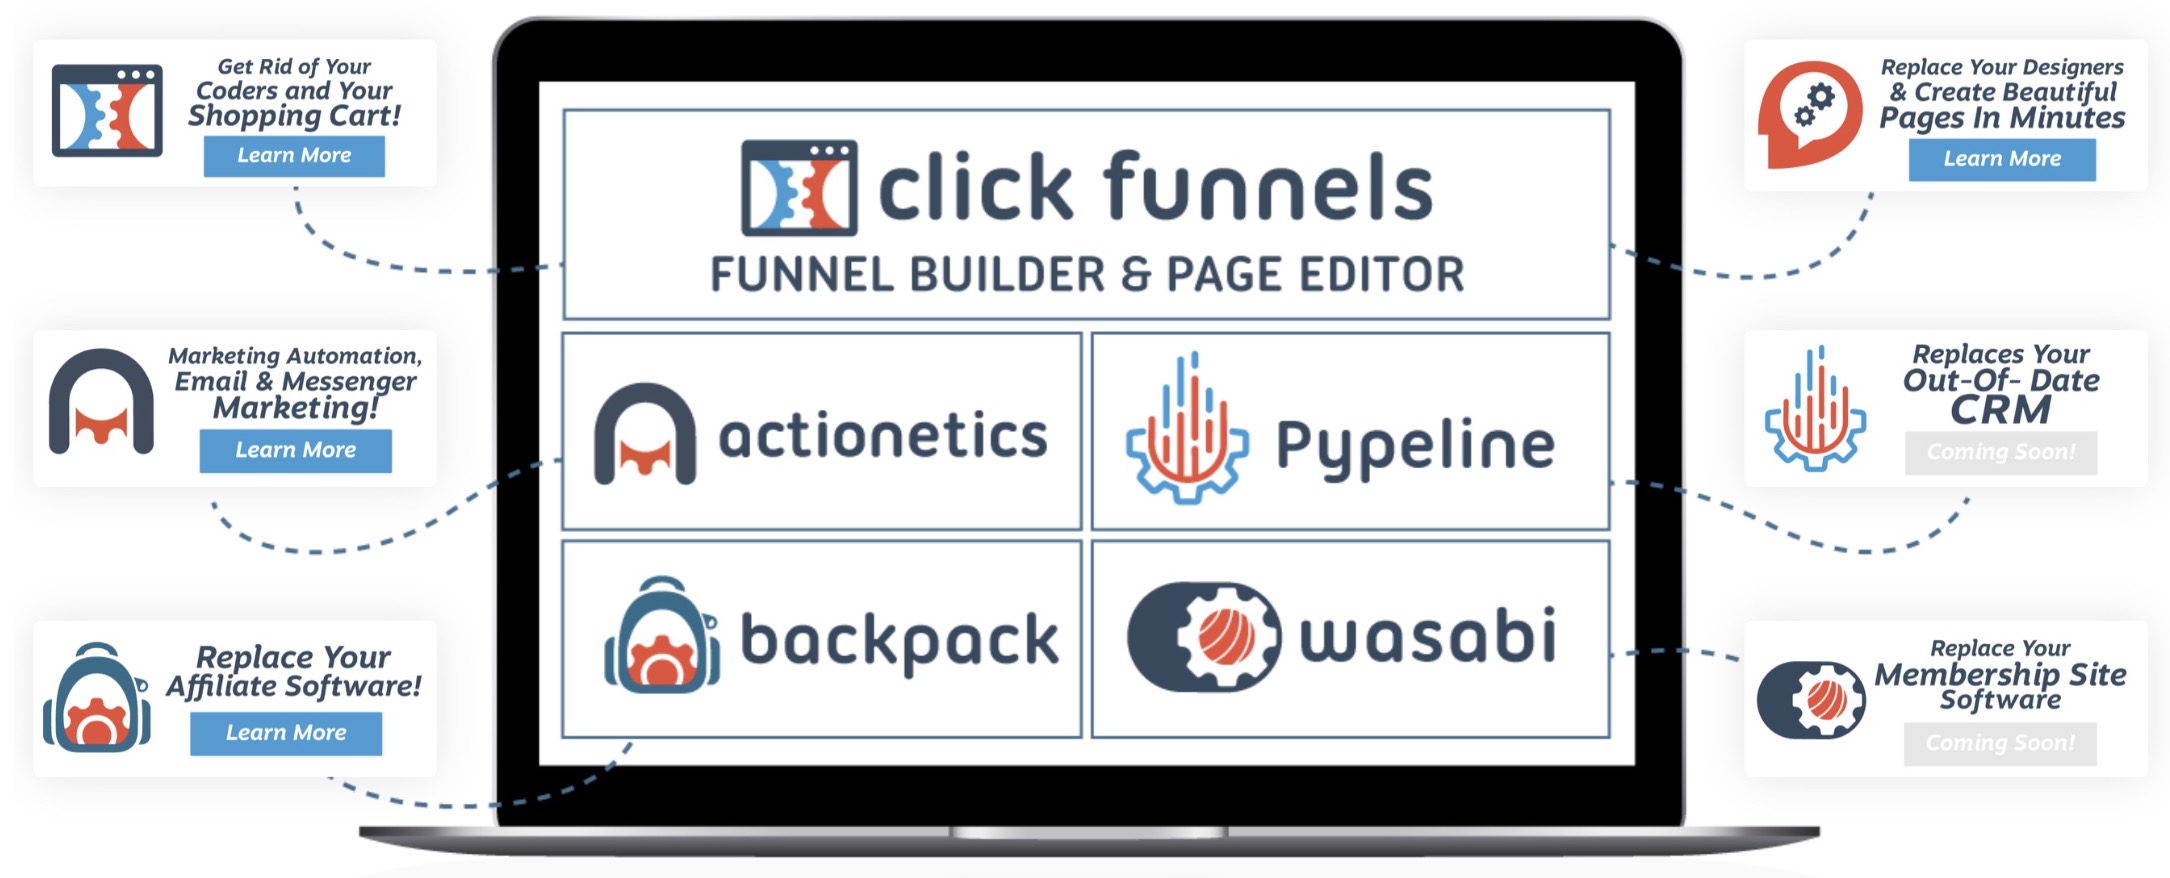 Unlimited sales funnel templates with affordable pricing plans